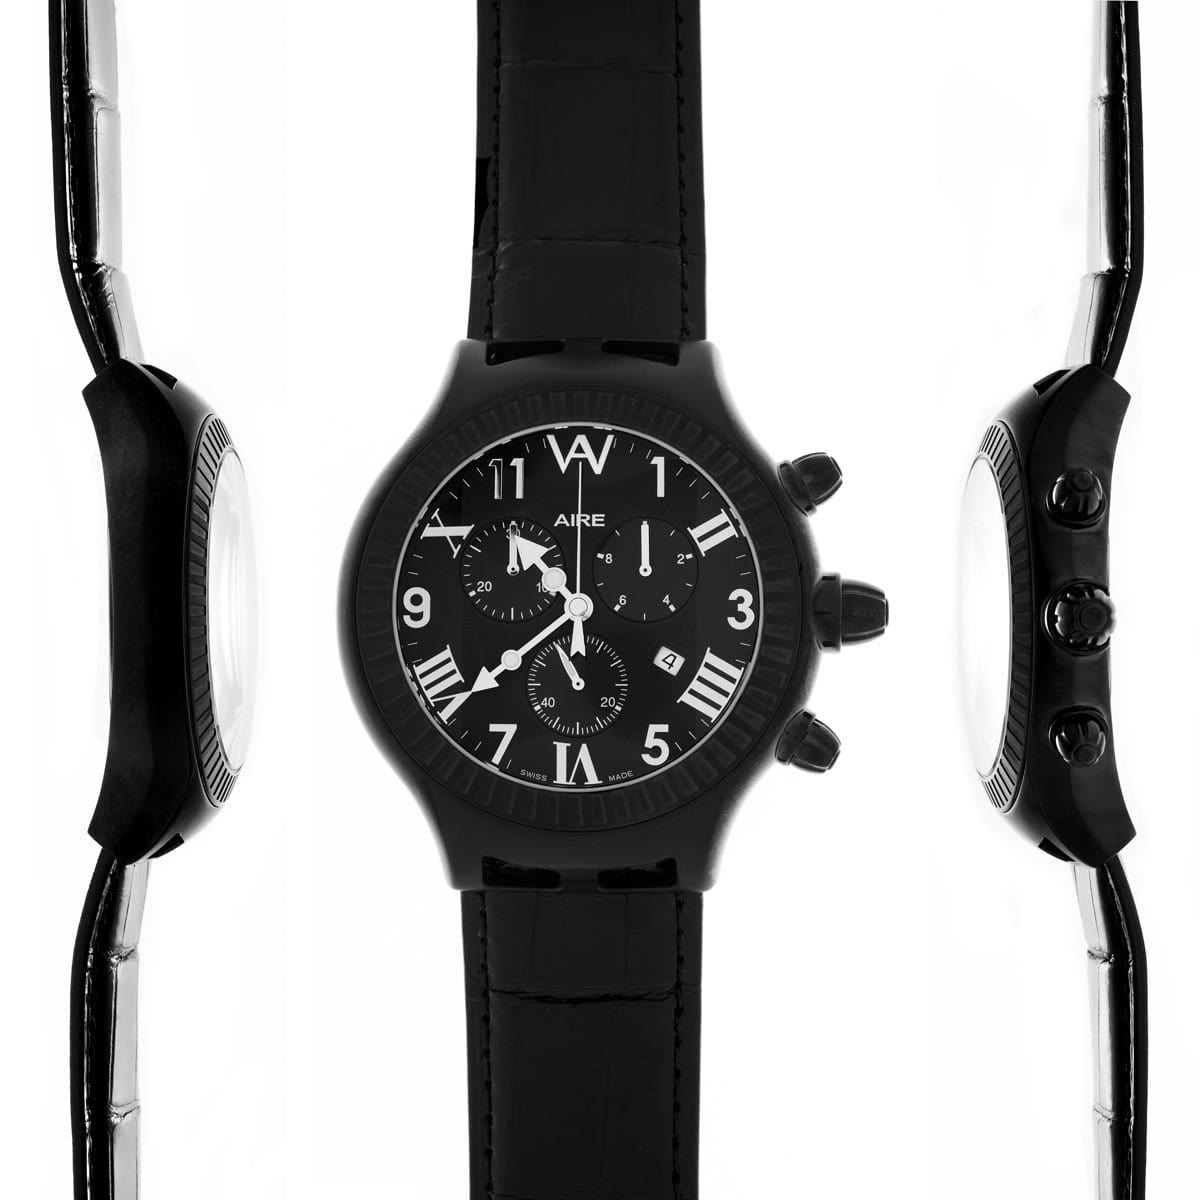 PARLAY BLACK  WATCH - Chris Aire Fine Jewelry & Timepieces